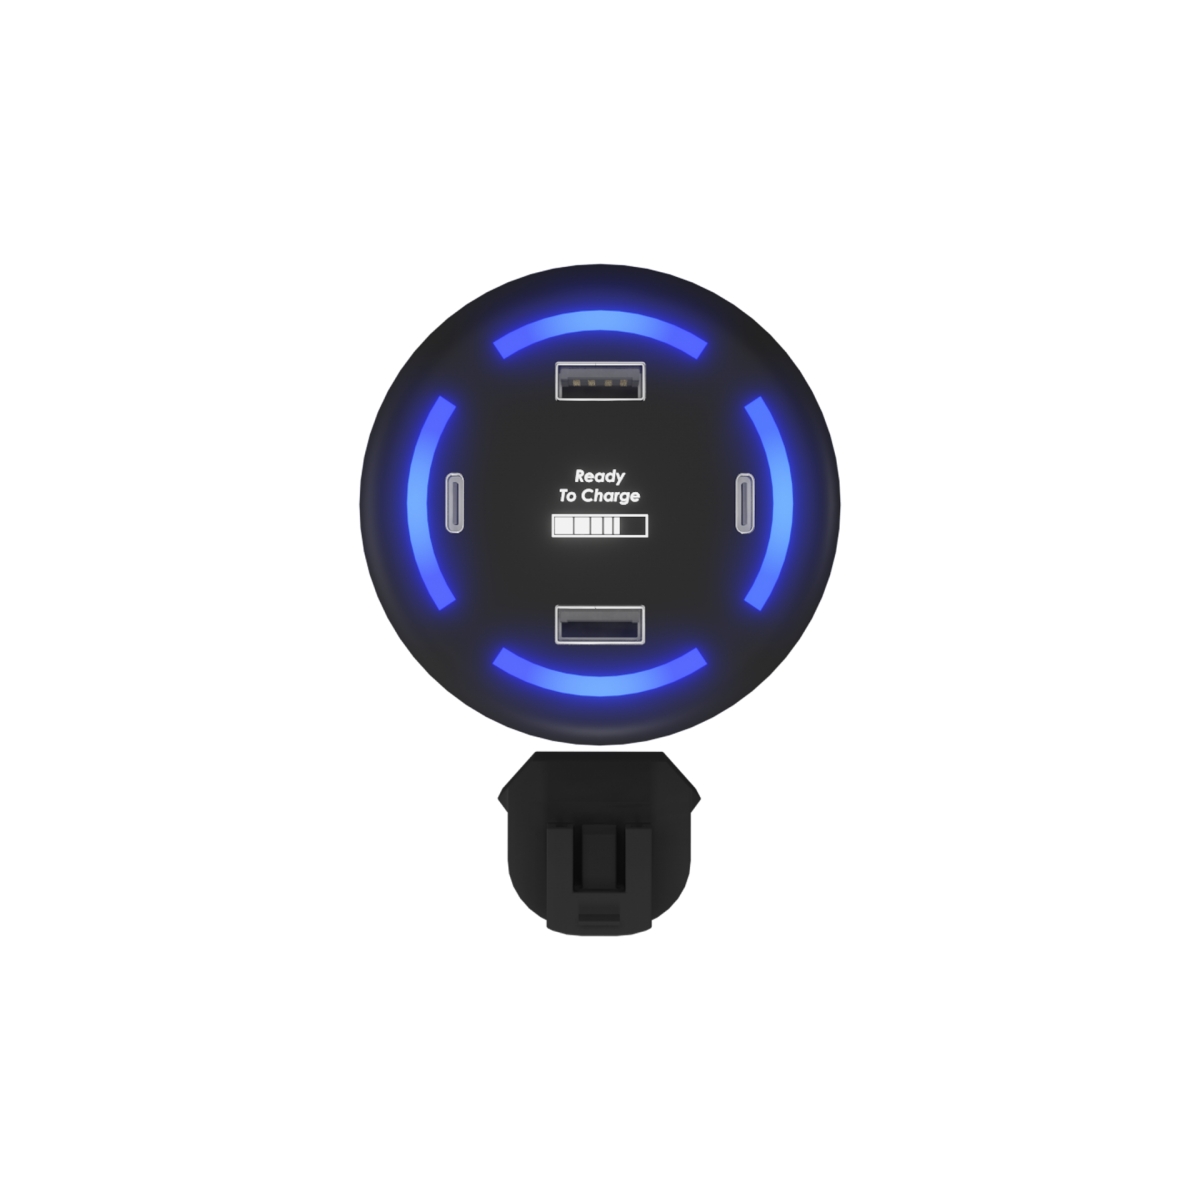 H11 - Smart home charger